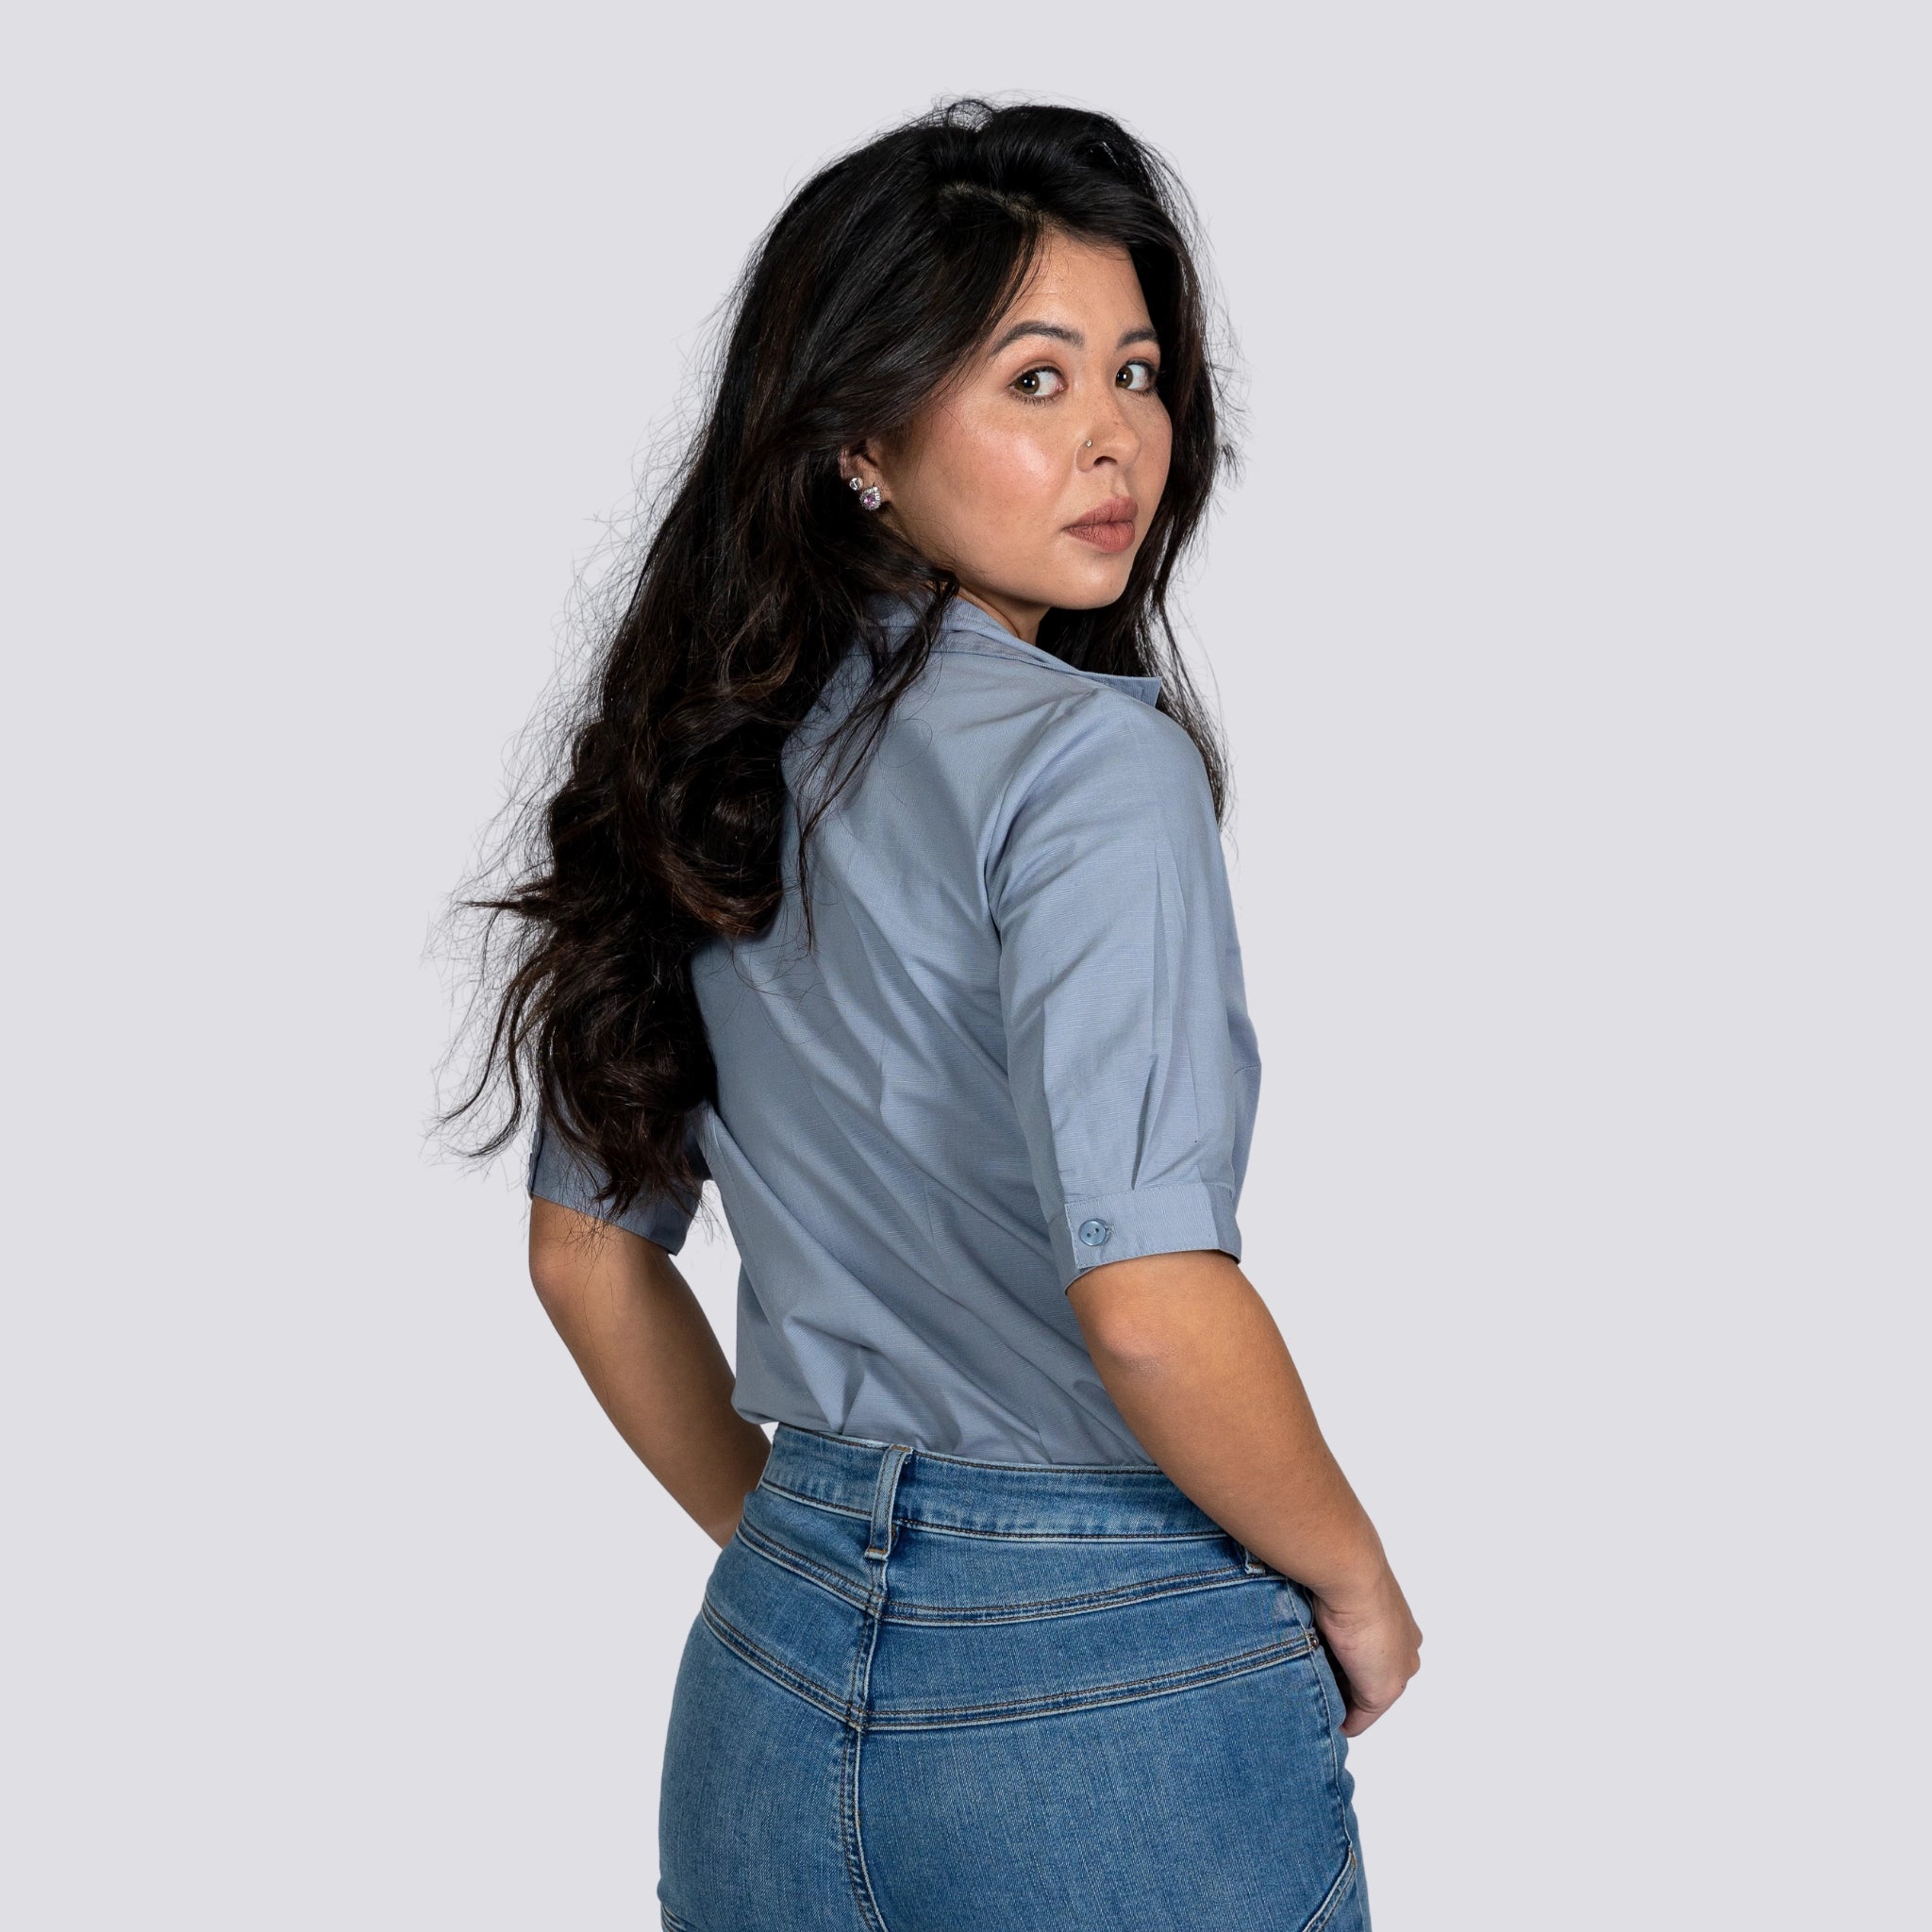 Asian woman in Karee Grey Mist Linen Shirt For Women and jeans, looking over her shoulder, standing against a gray background.